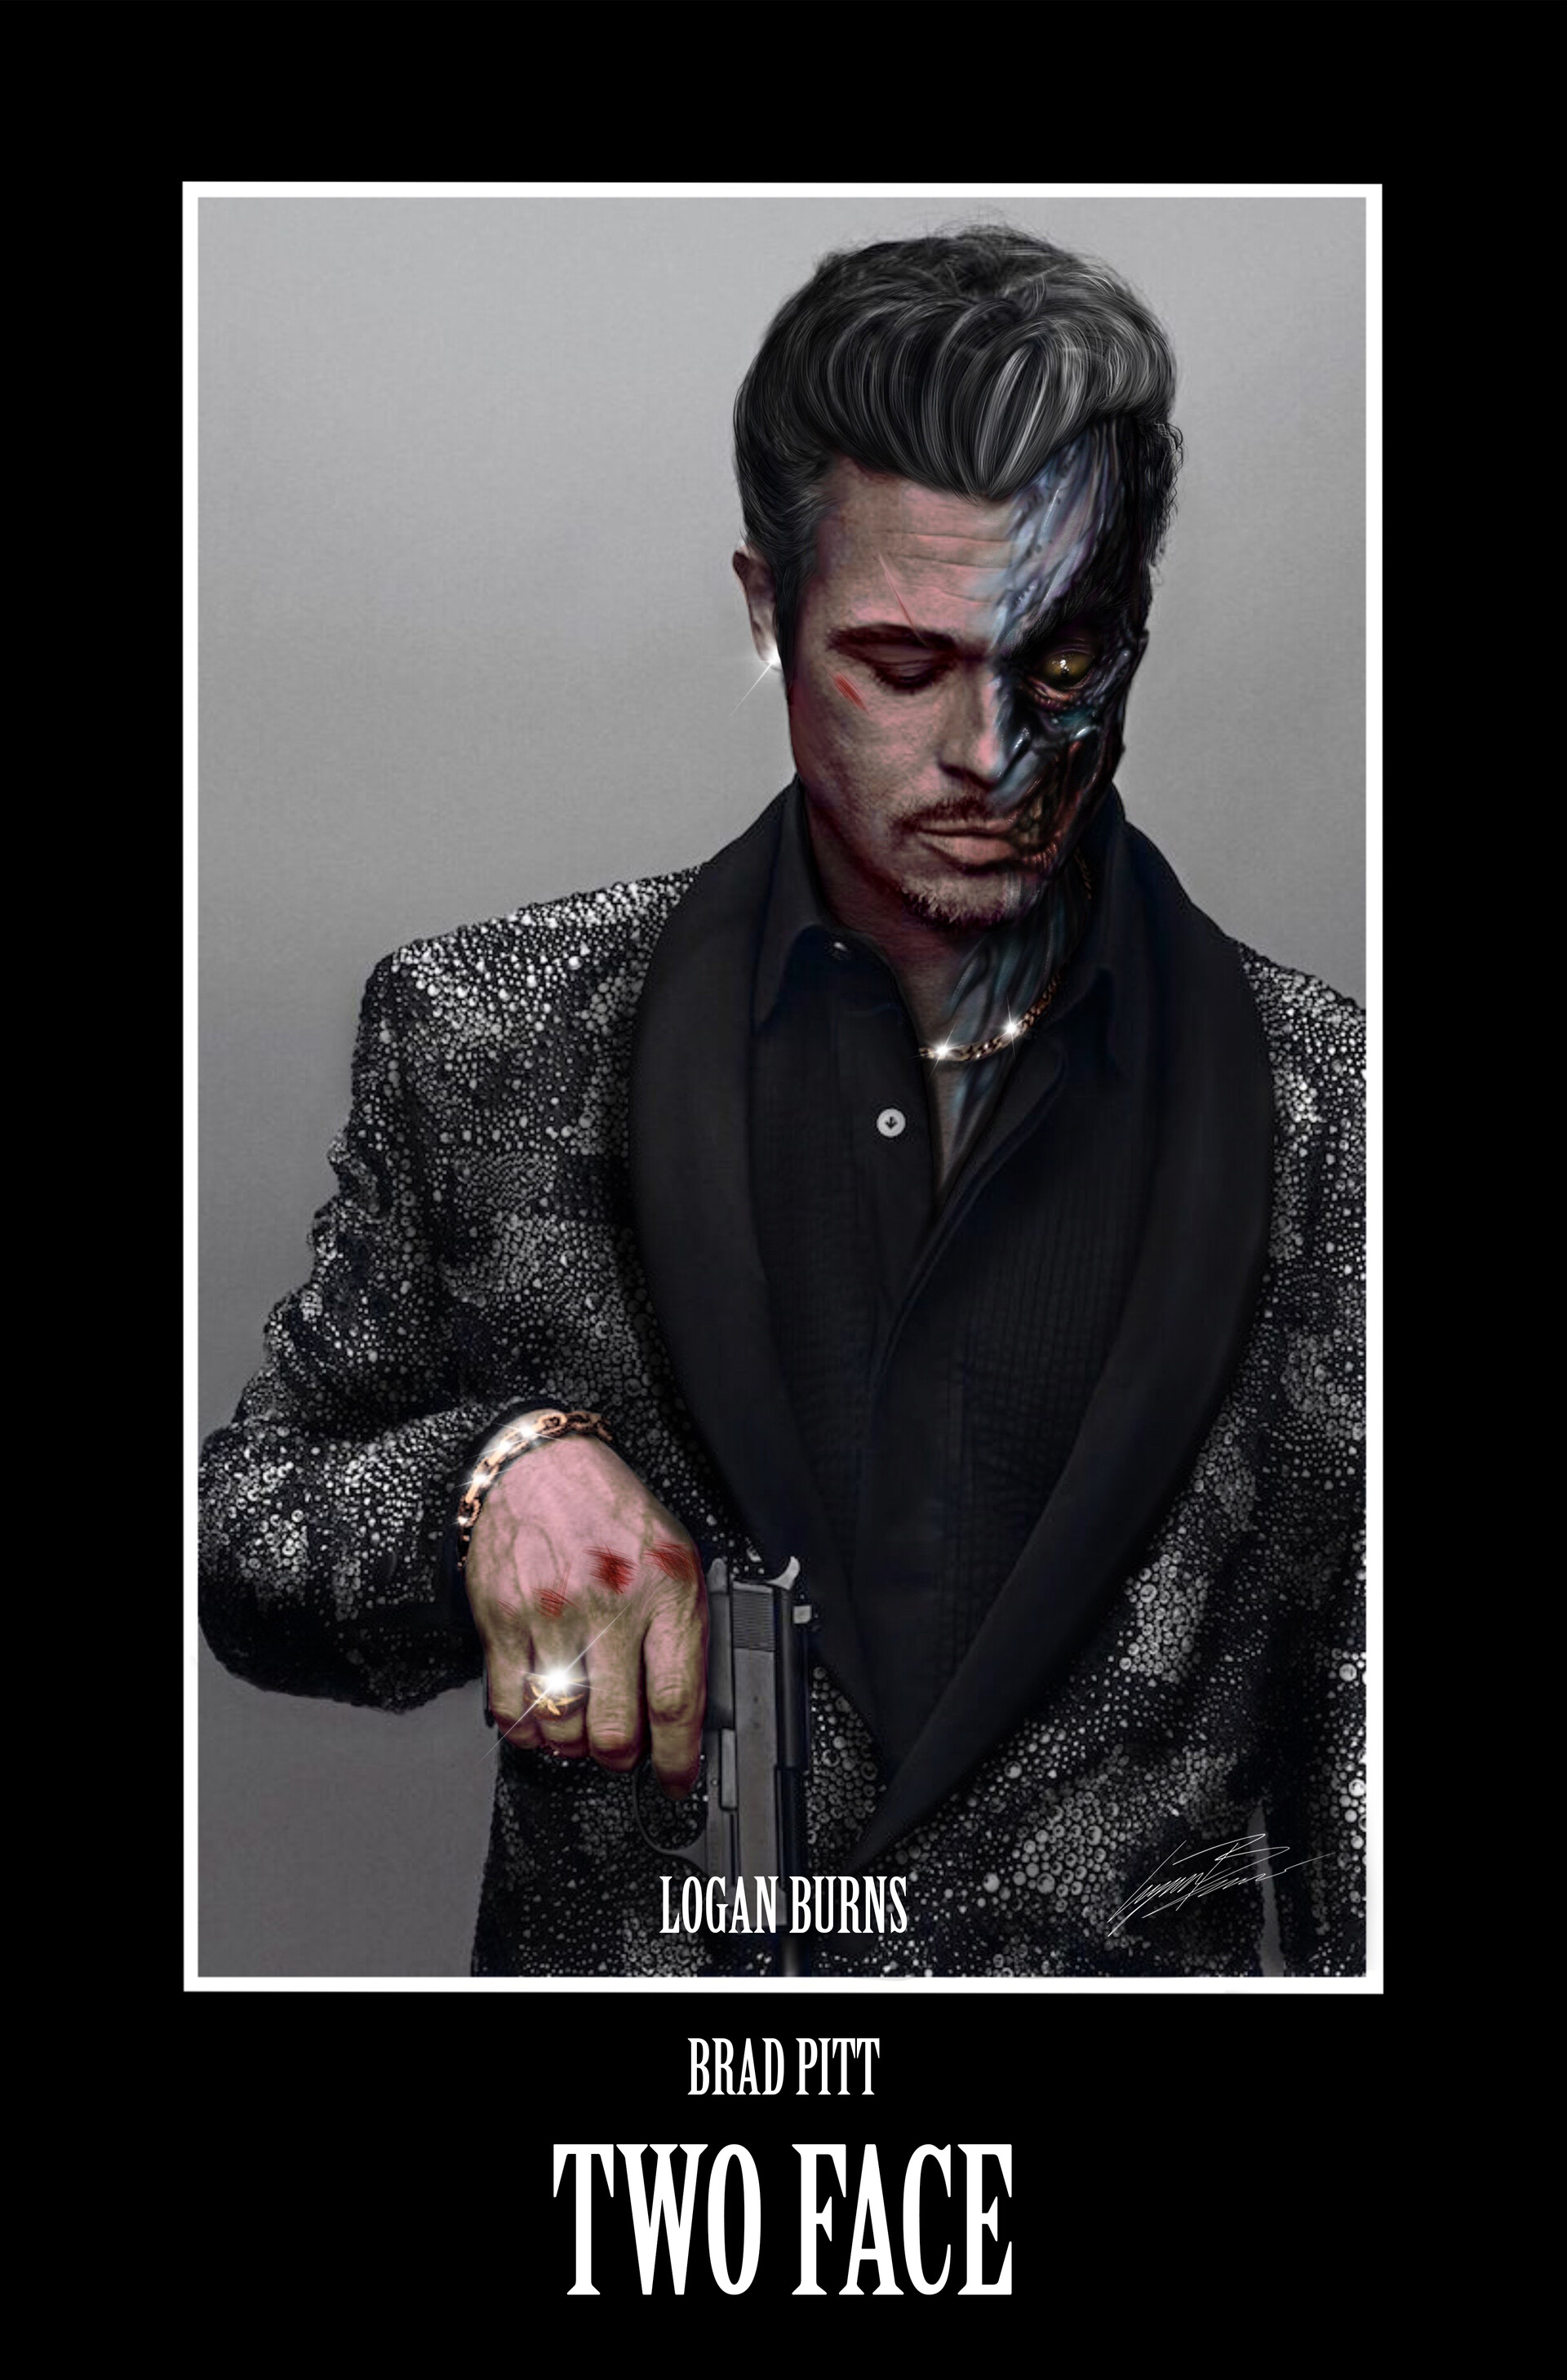 logan-burns-brx-pitt-two-face-no-borders-poster-signature-on-picture.jpg